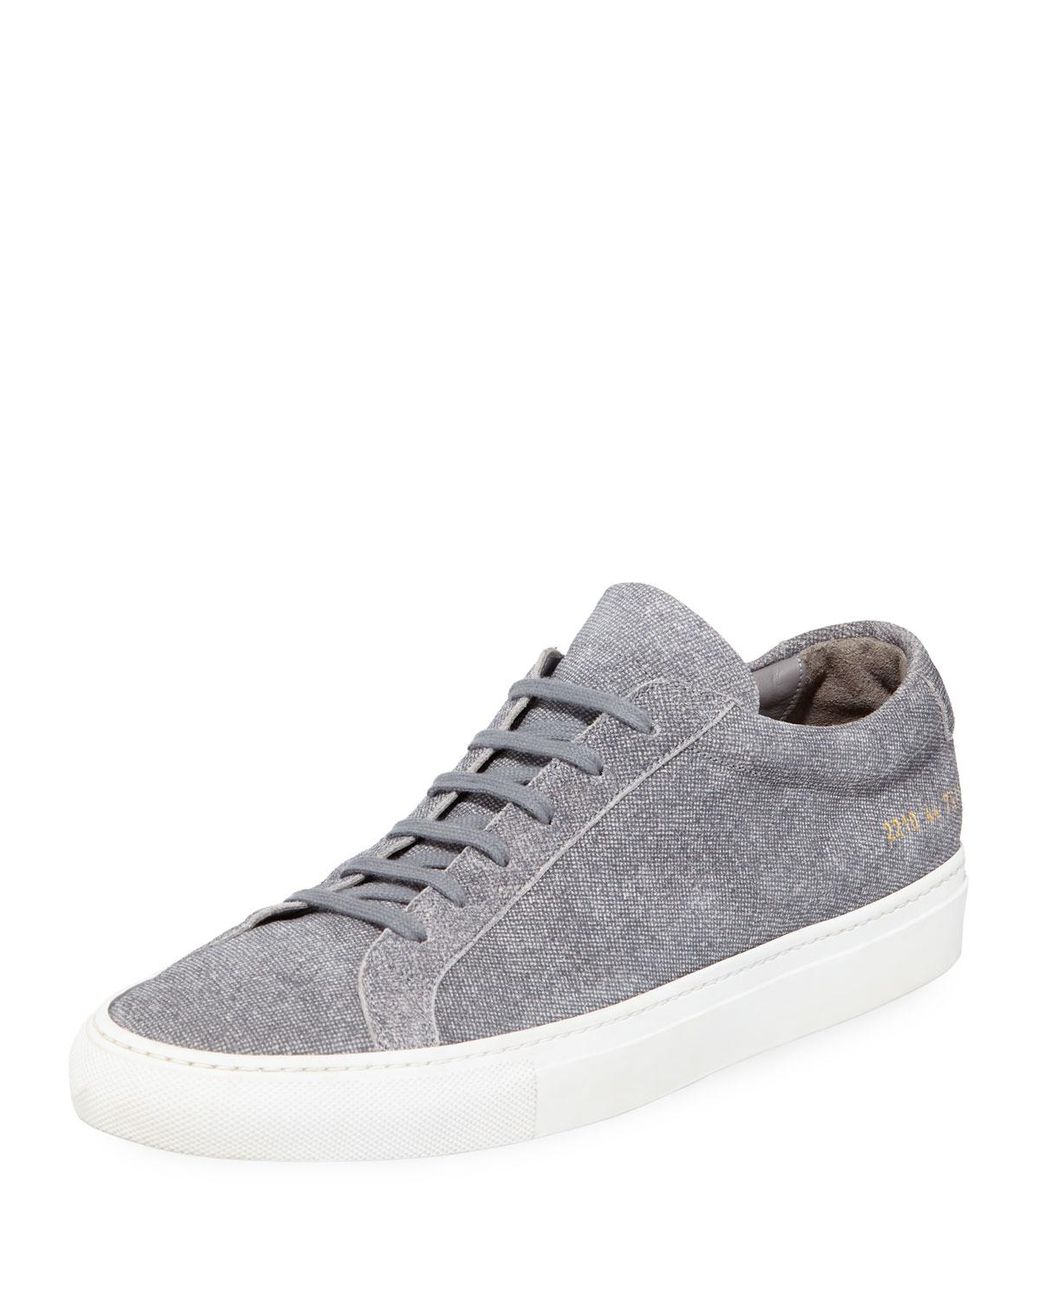 Common Projects Men's Achilles Patterned Suede Low-top Sneakers in Gray ...